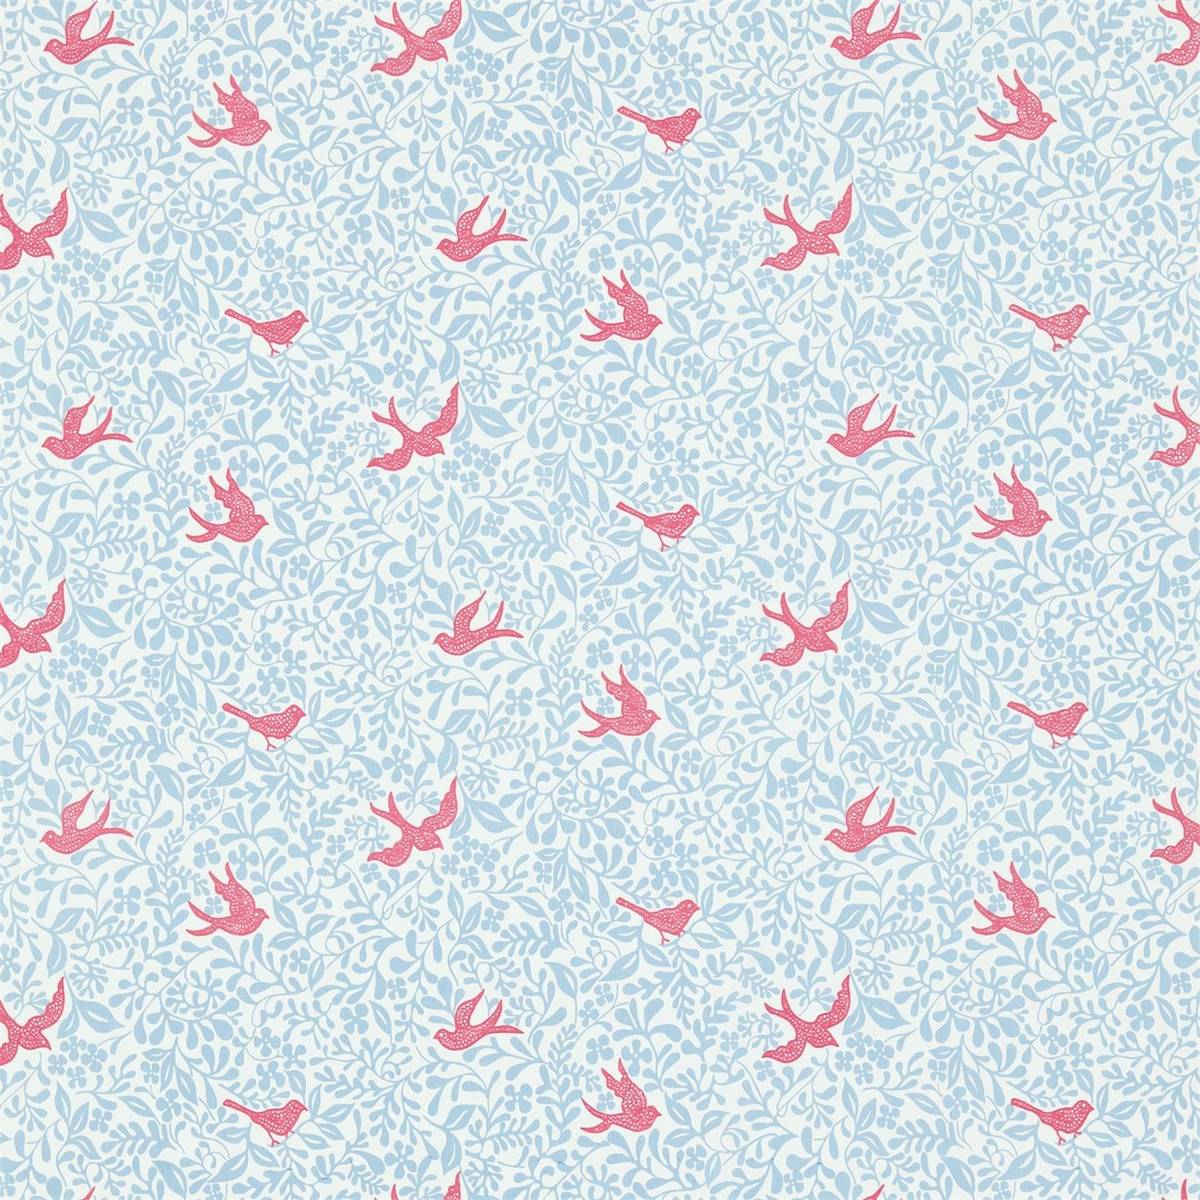 Larksong Powder Blue/Pink Fabric by Sanderson